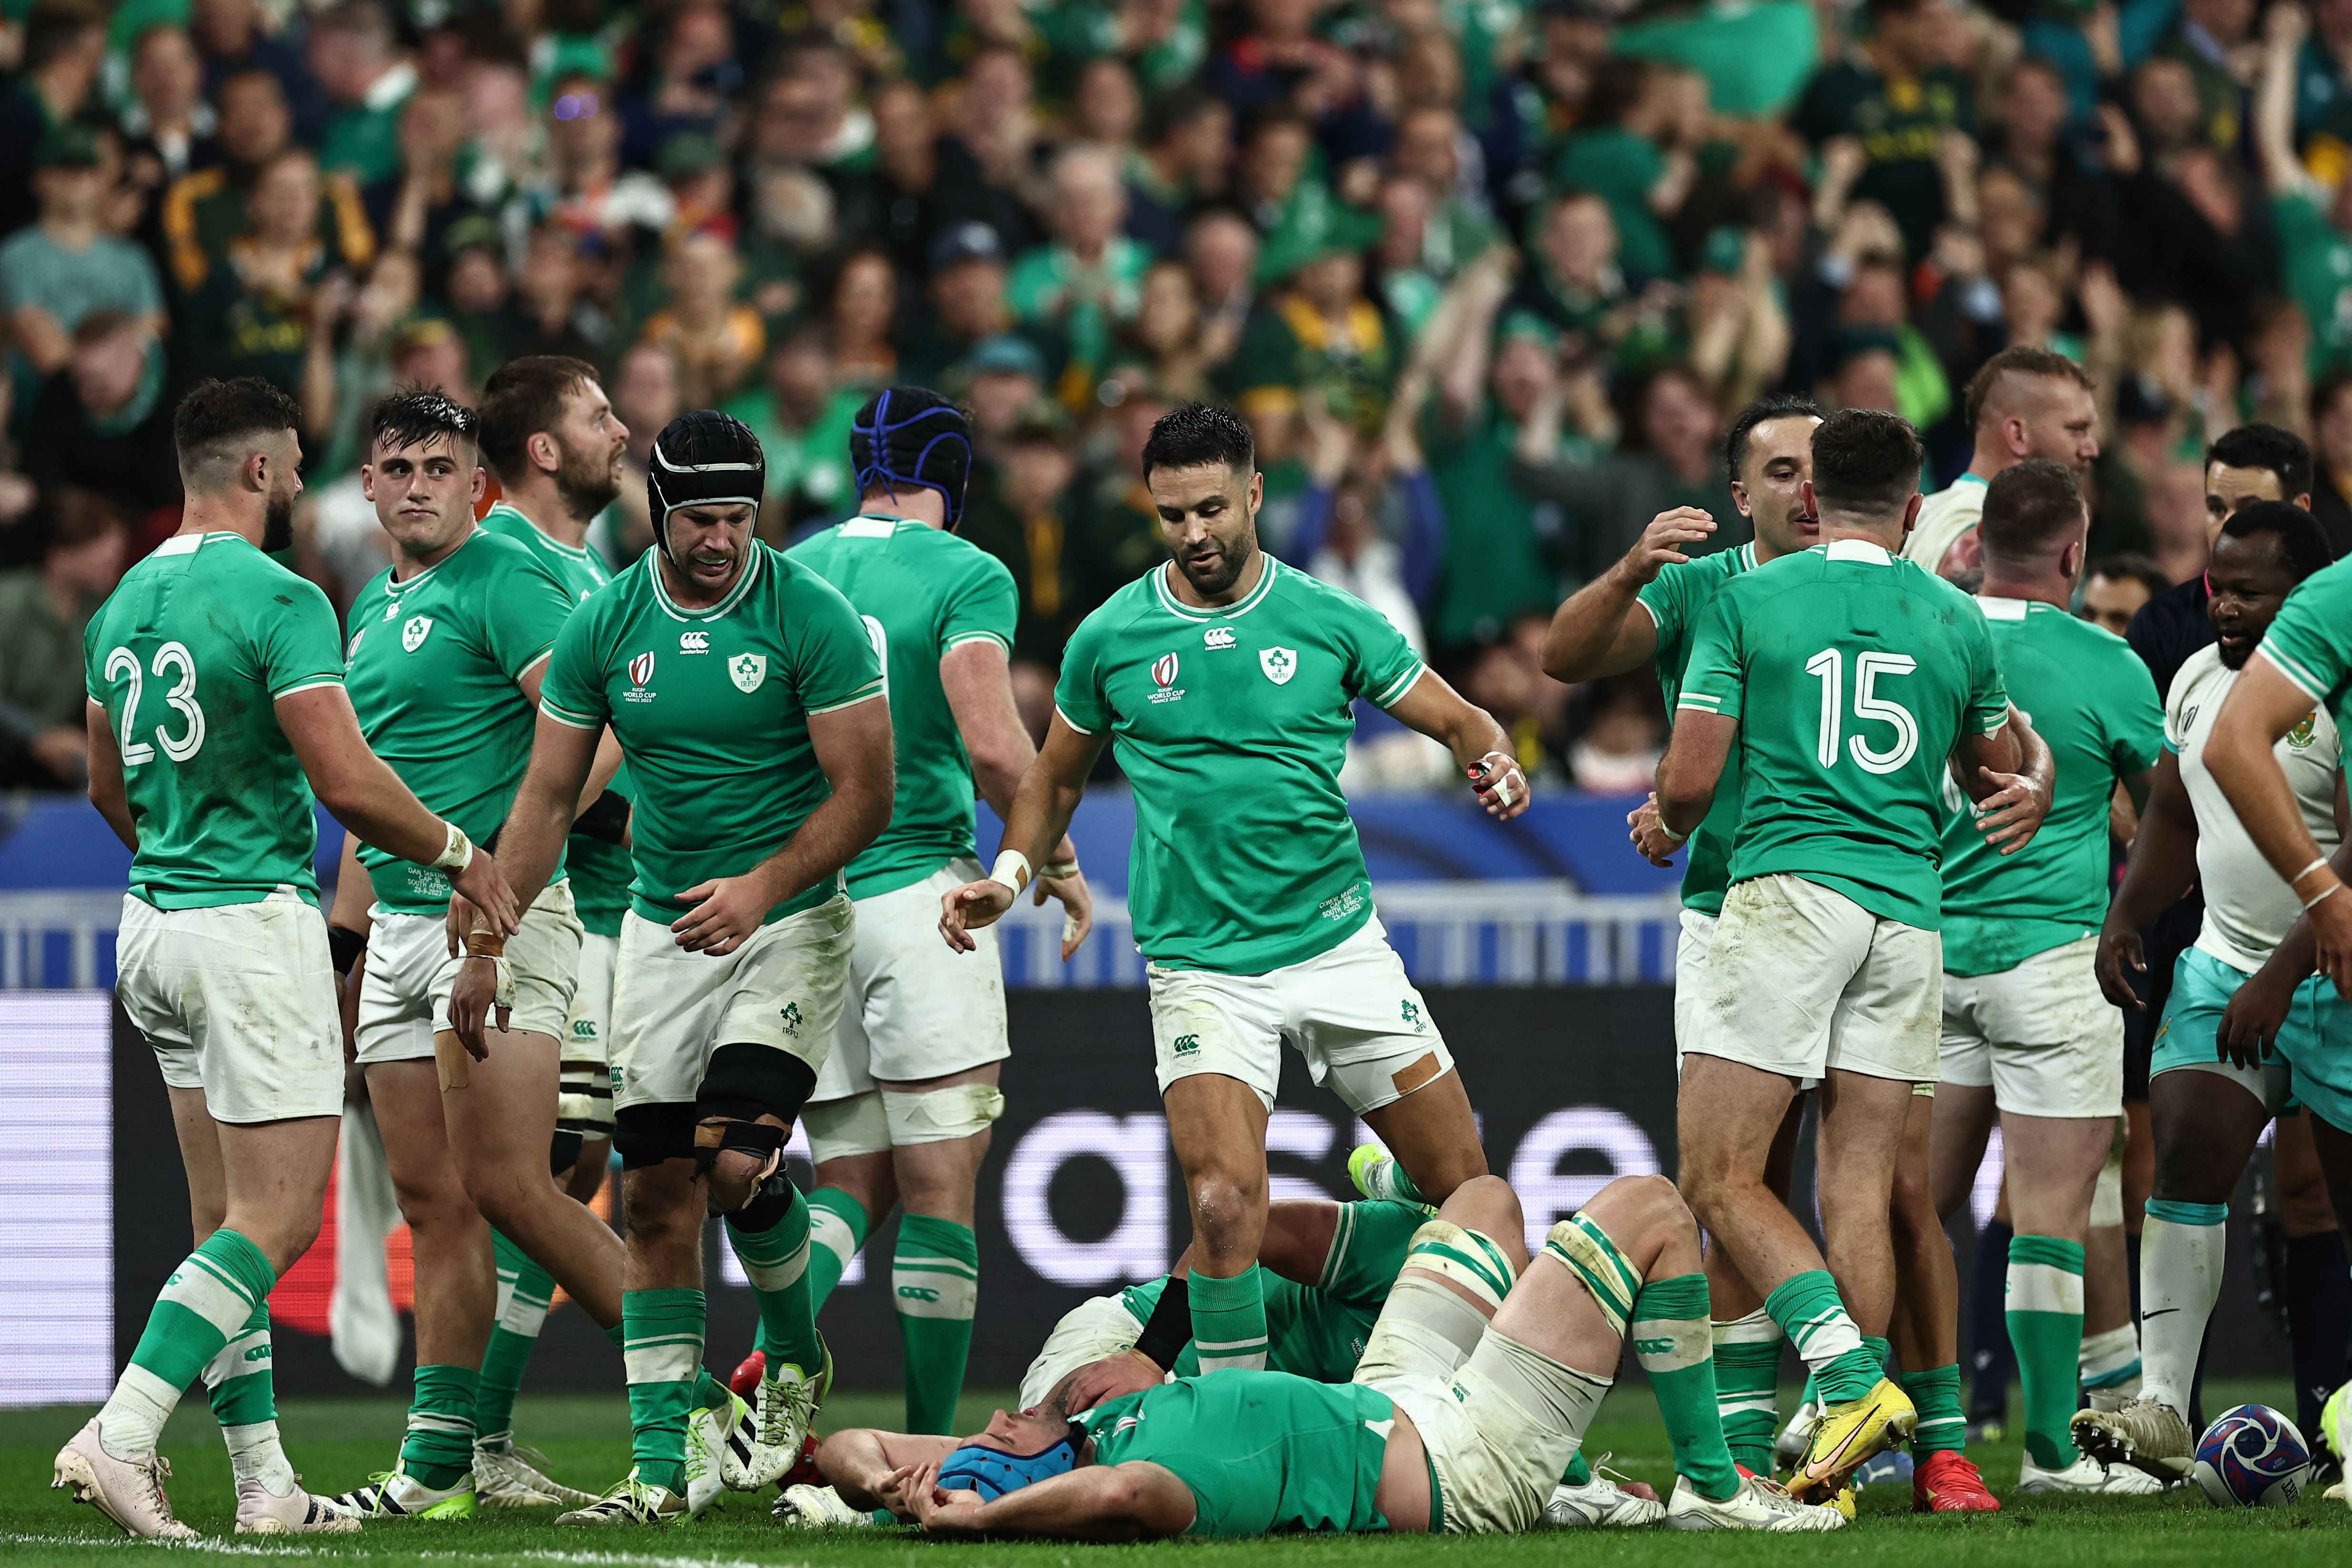 Rugby World Cup TV schedule All games will be to free-to-air for fans in Ireland